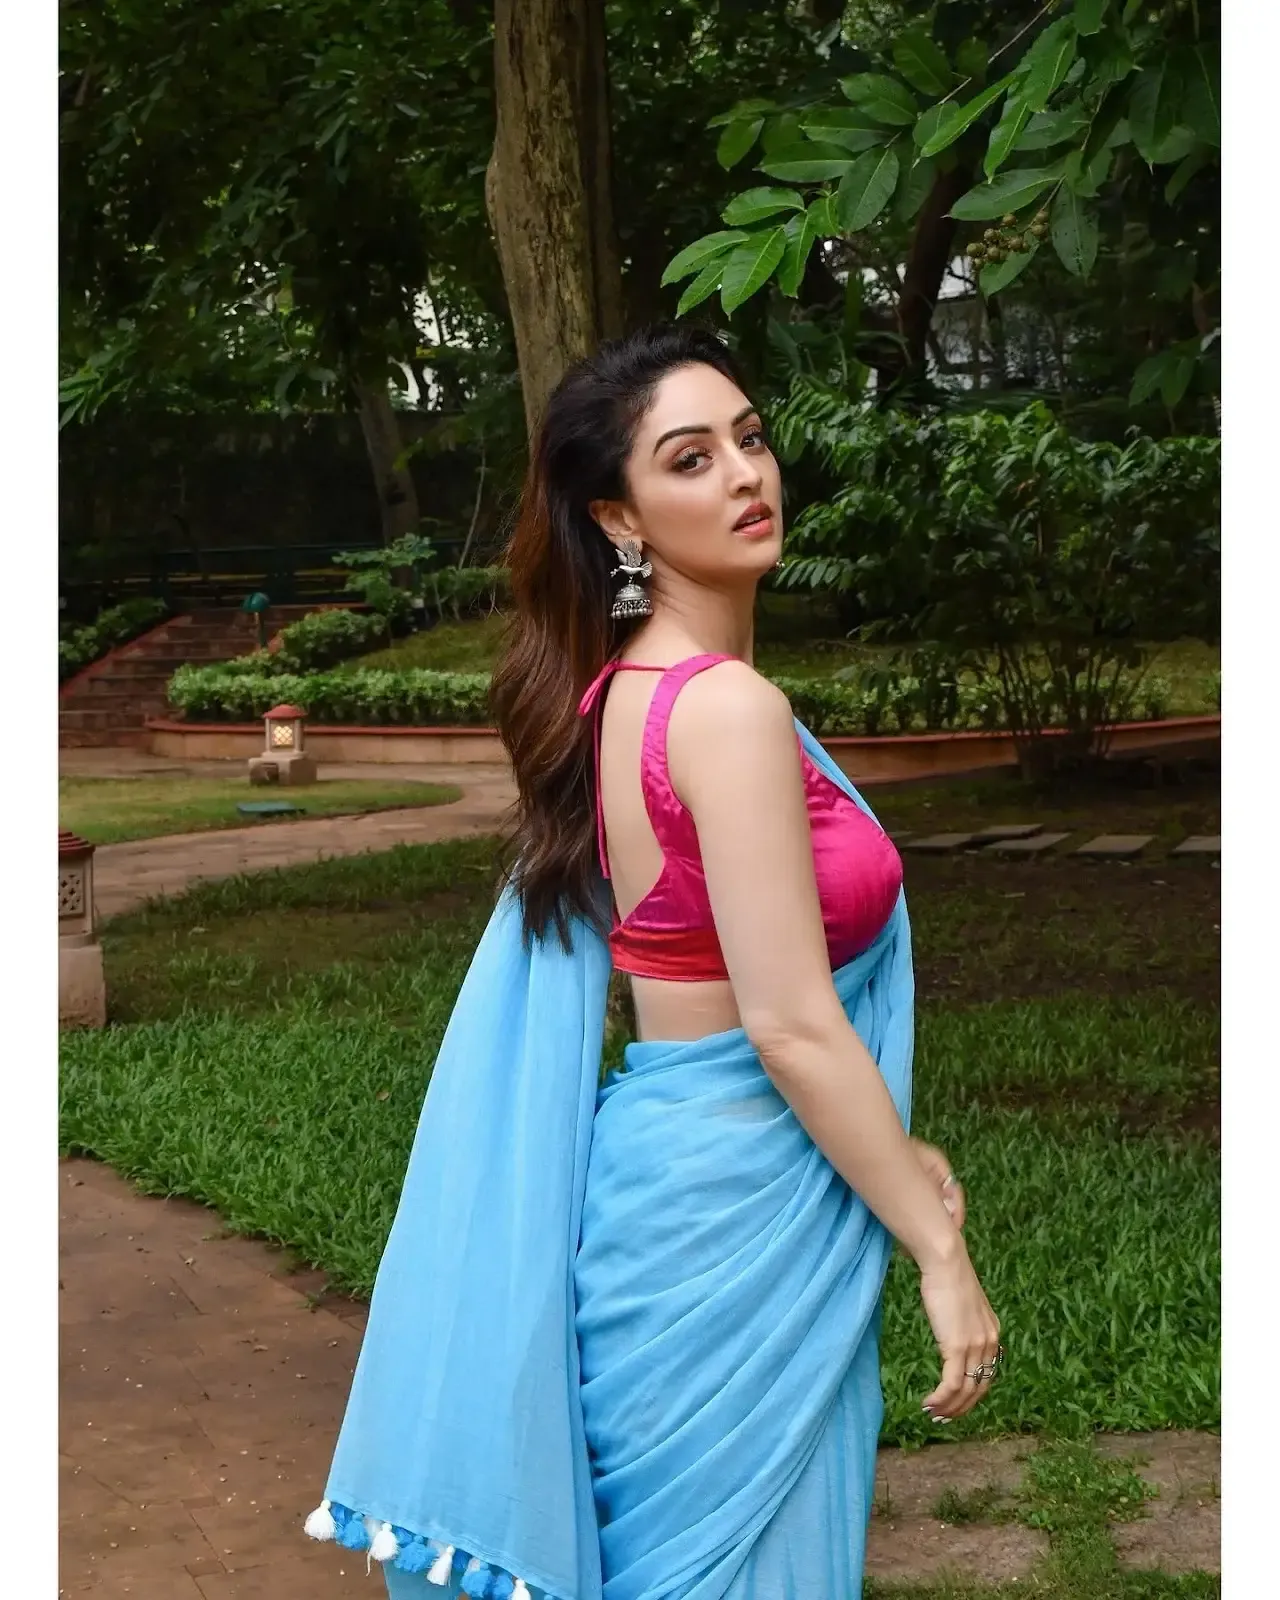 NORTH INDIAN ACTRESS SANDEEPA DHAR IMAGES IN TRADITIONAL BLUE SAREE 2